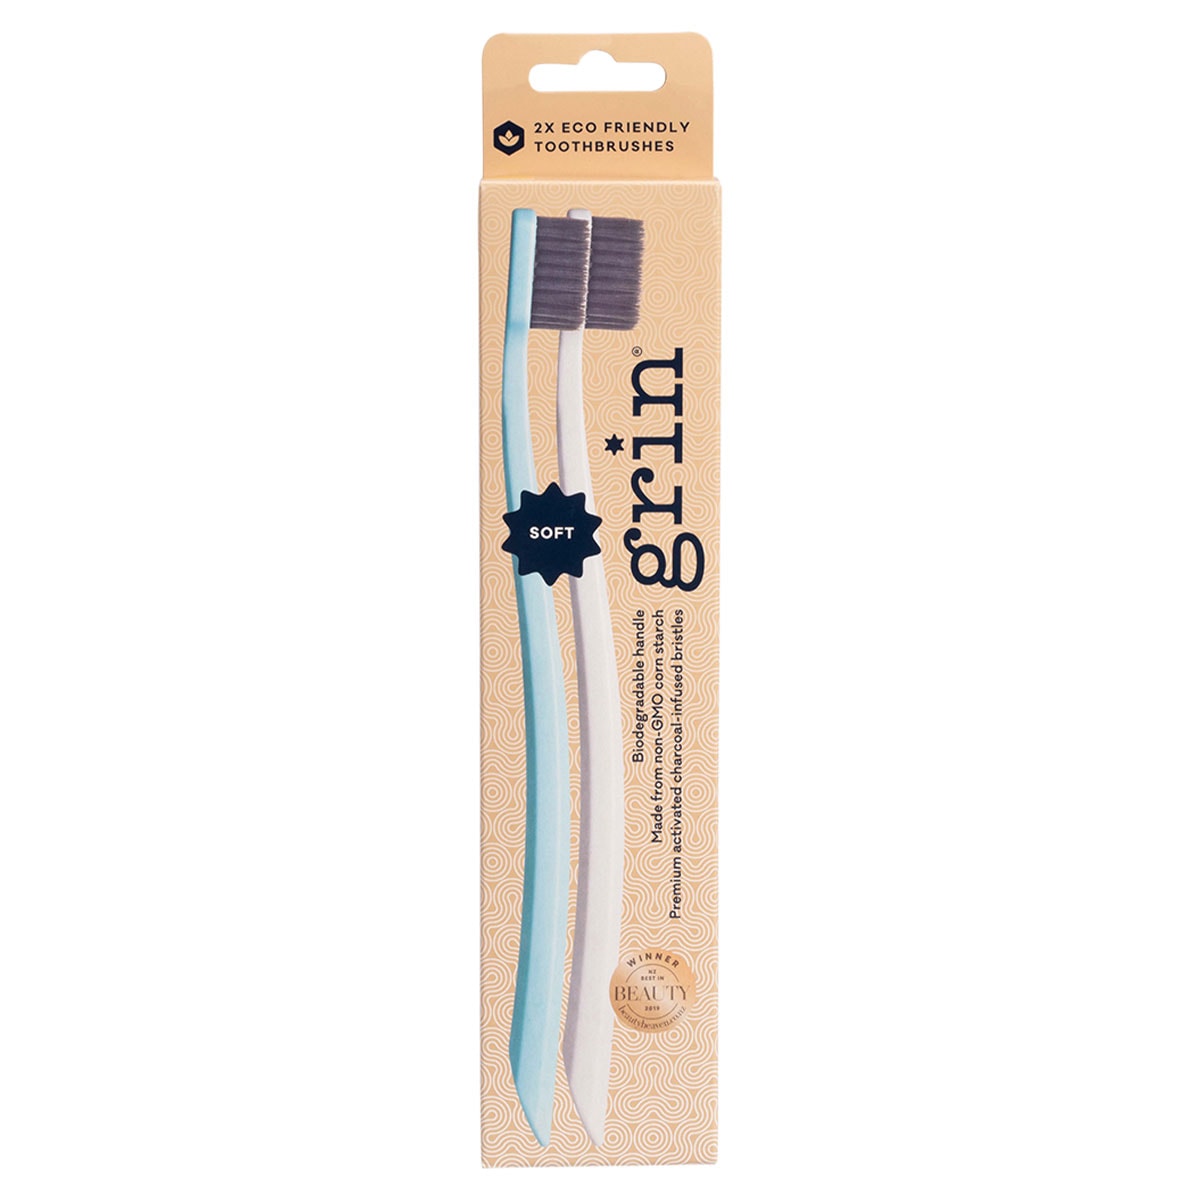 GRIN Biodegradable Toothbrush 2 Pack